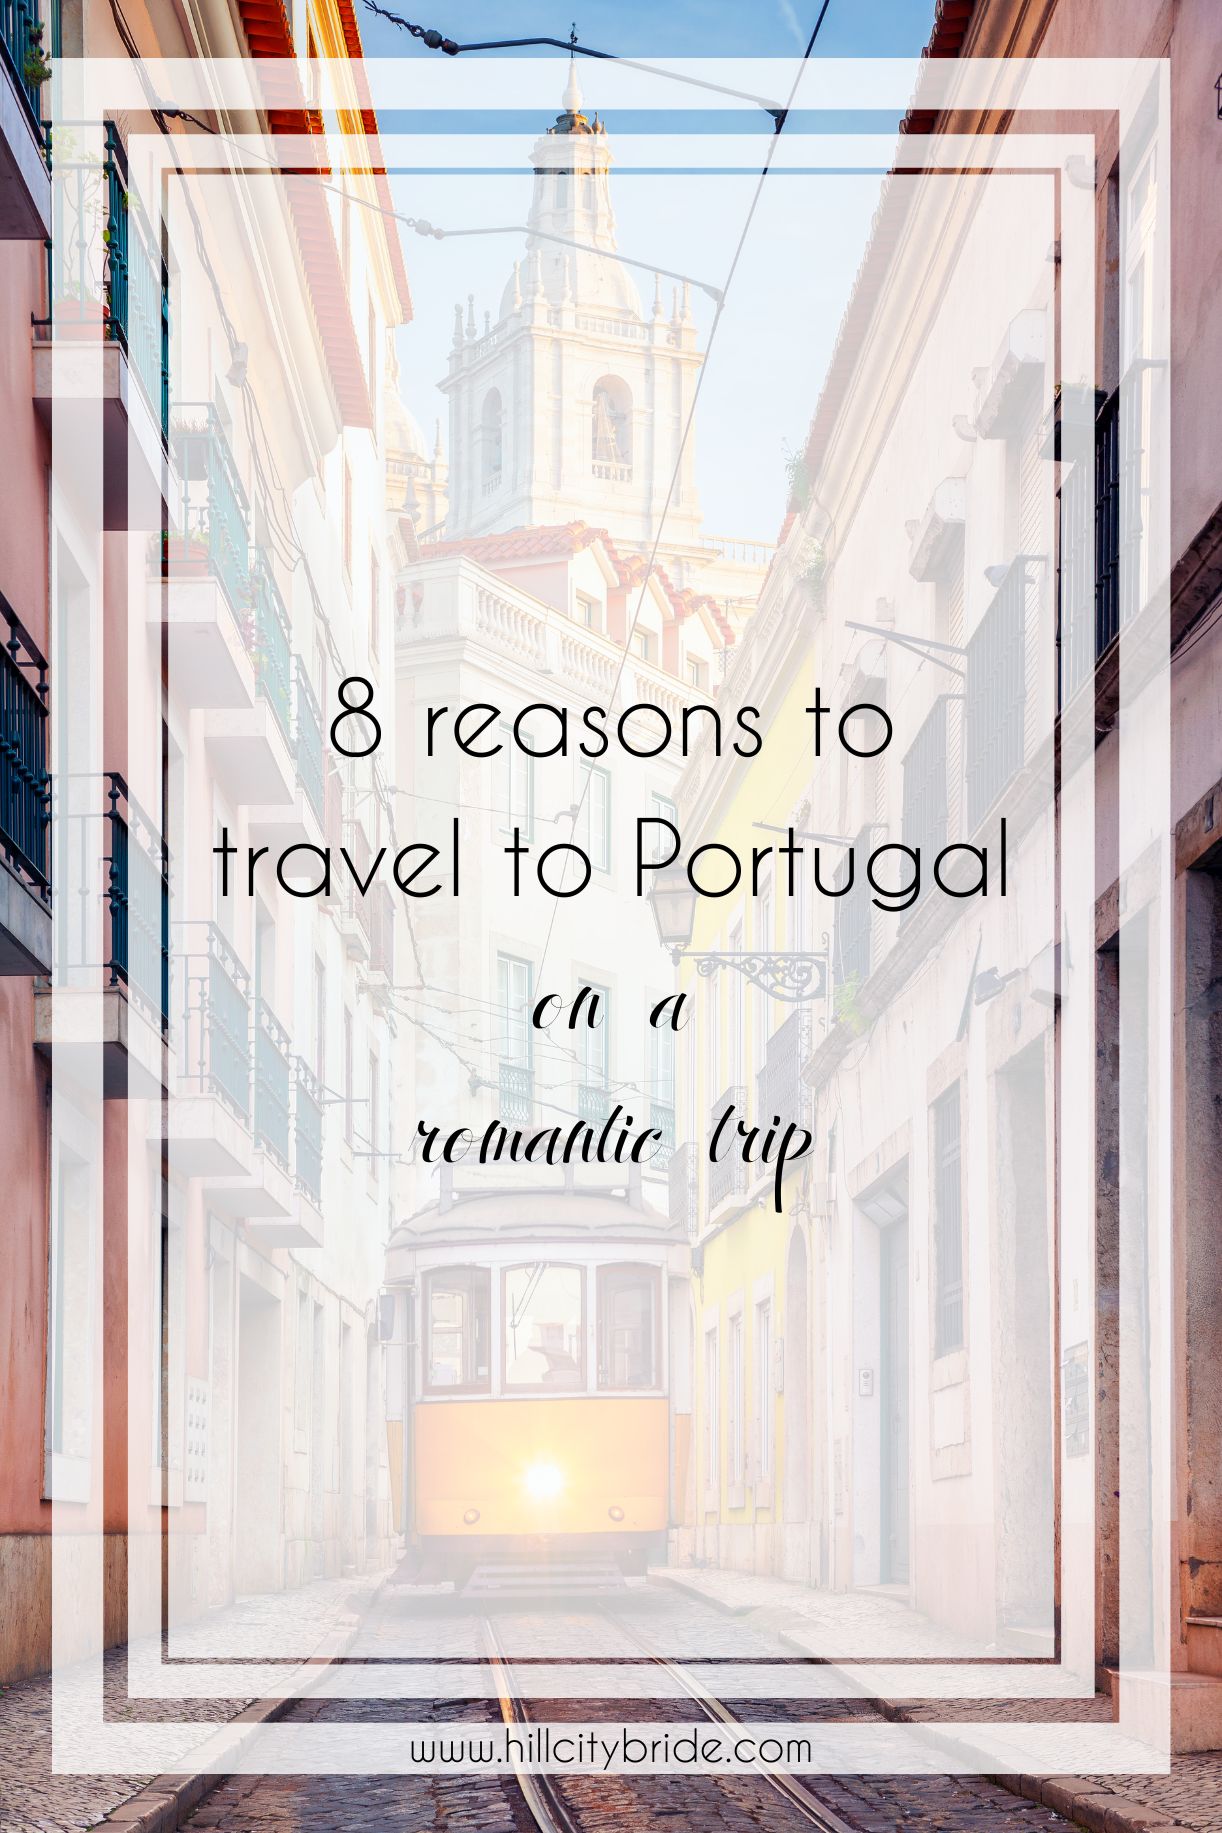 8 Reasons to Travel to Portugal on Your Next Vacation